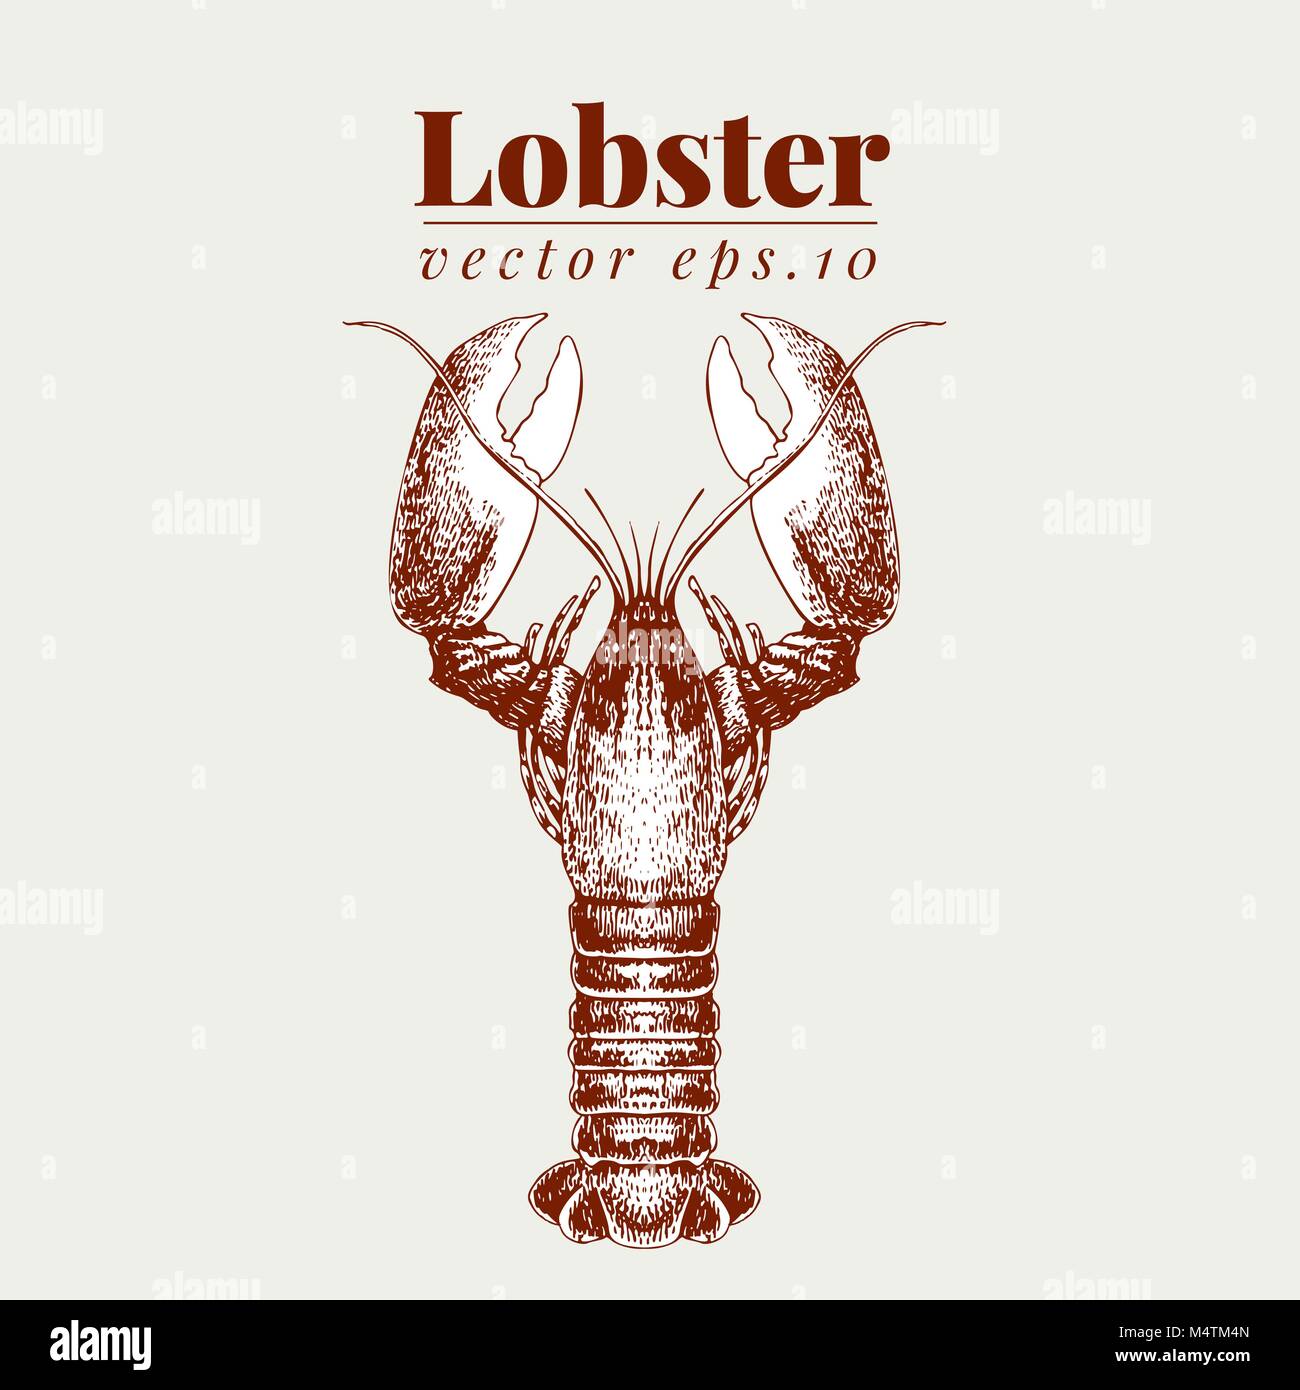 Vector seafood illustration. Lobster retro lillustration. Hand drawing sketch omar. Can be use for restaurant menu, kitchen design, paper, wrapping, fabrics. Stock Vector